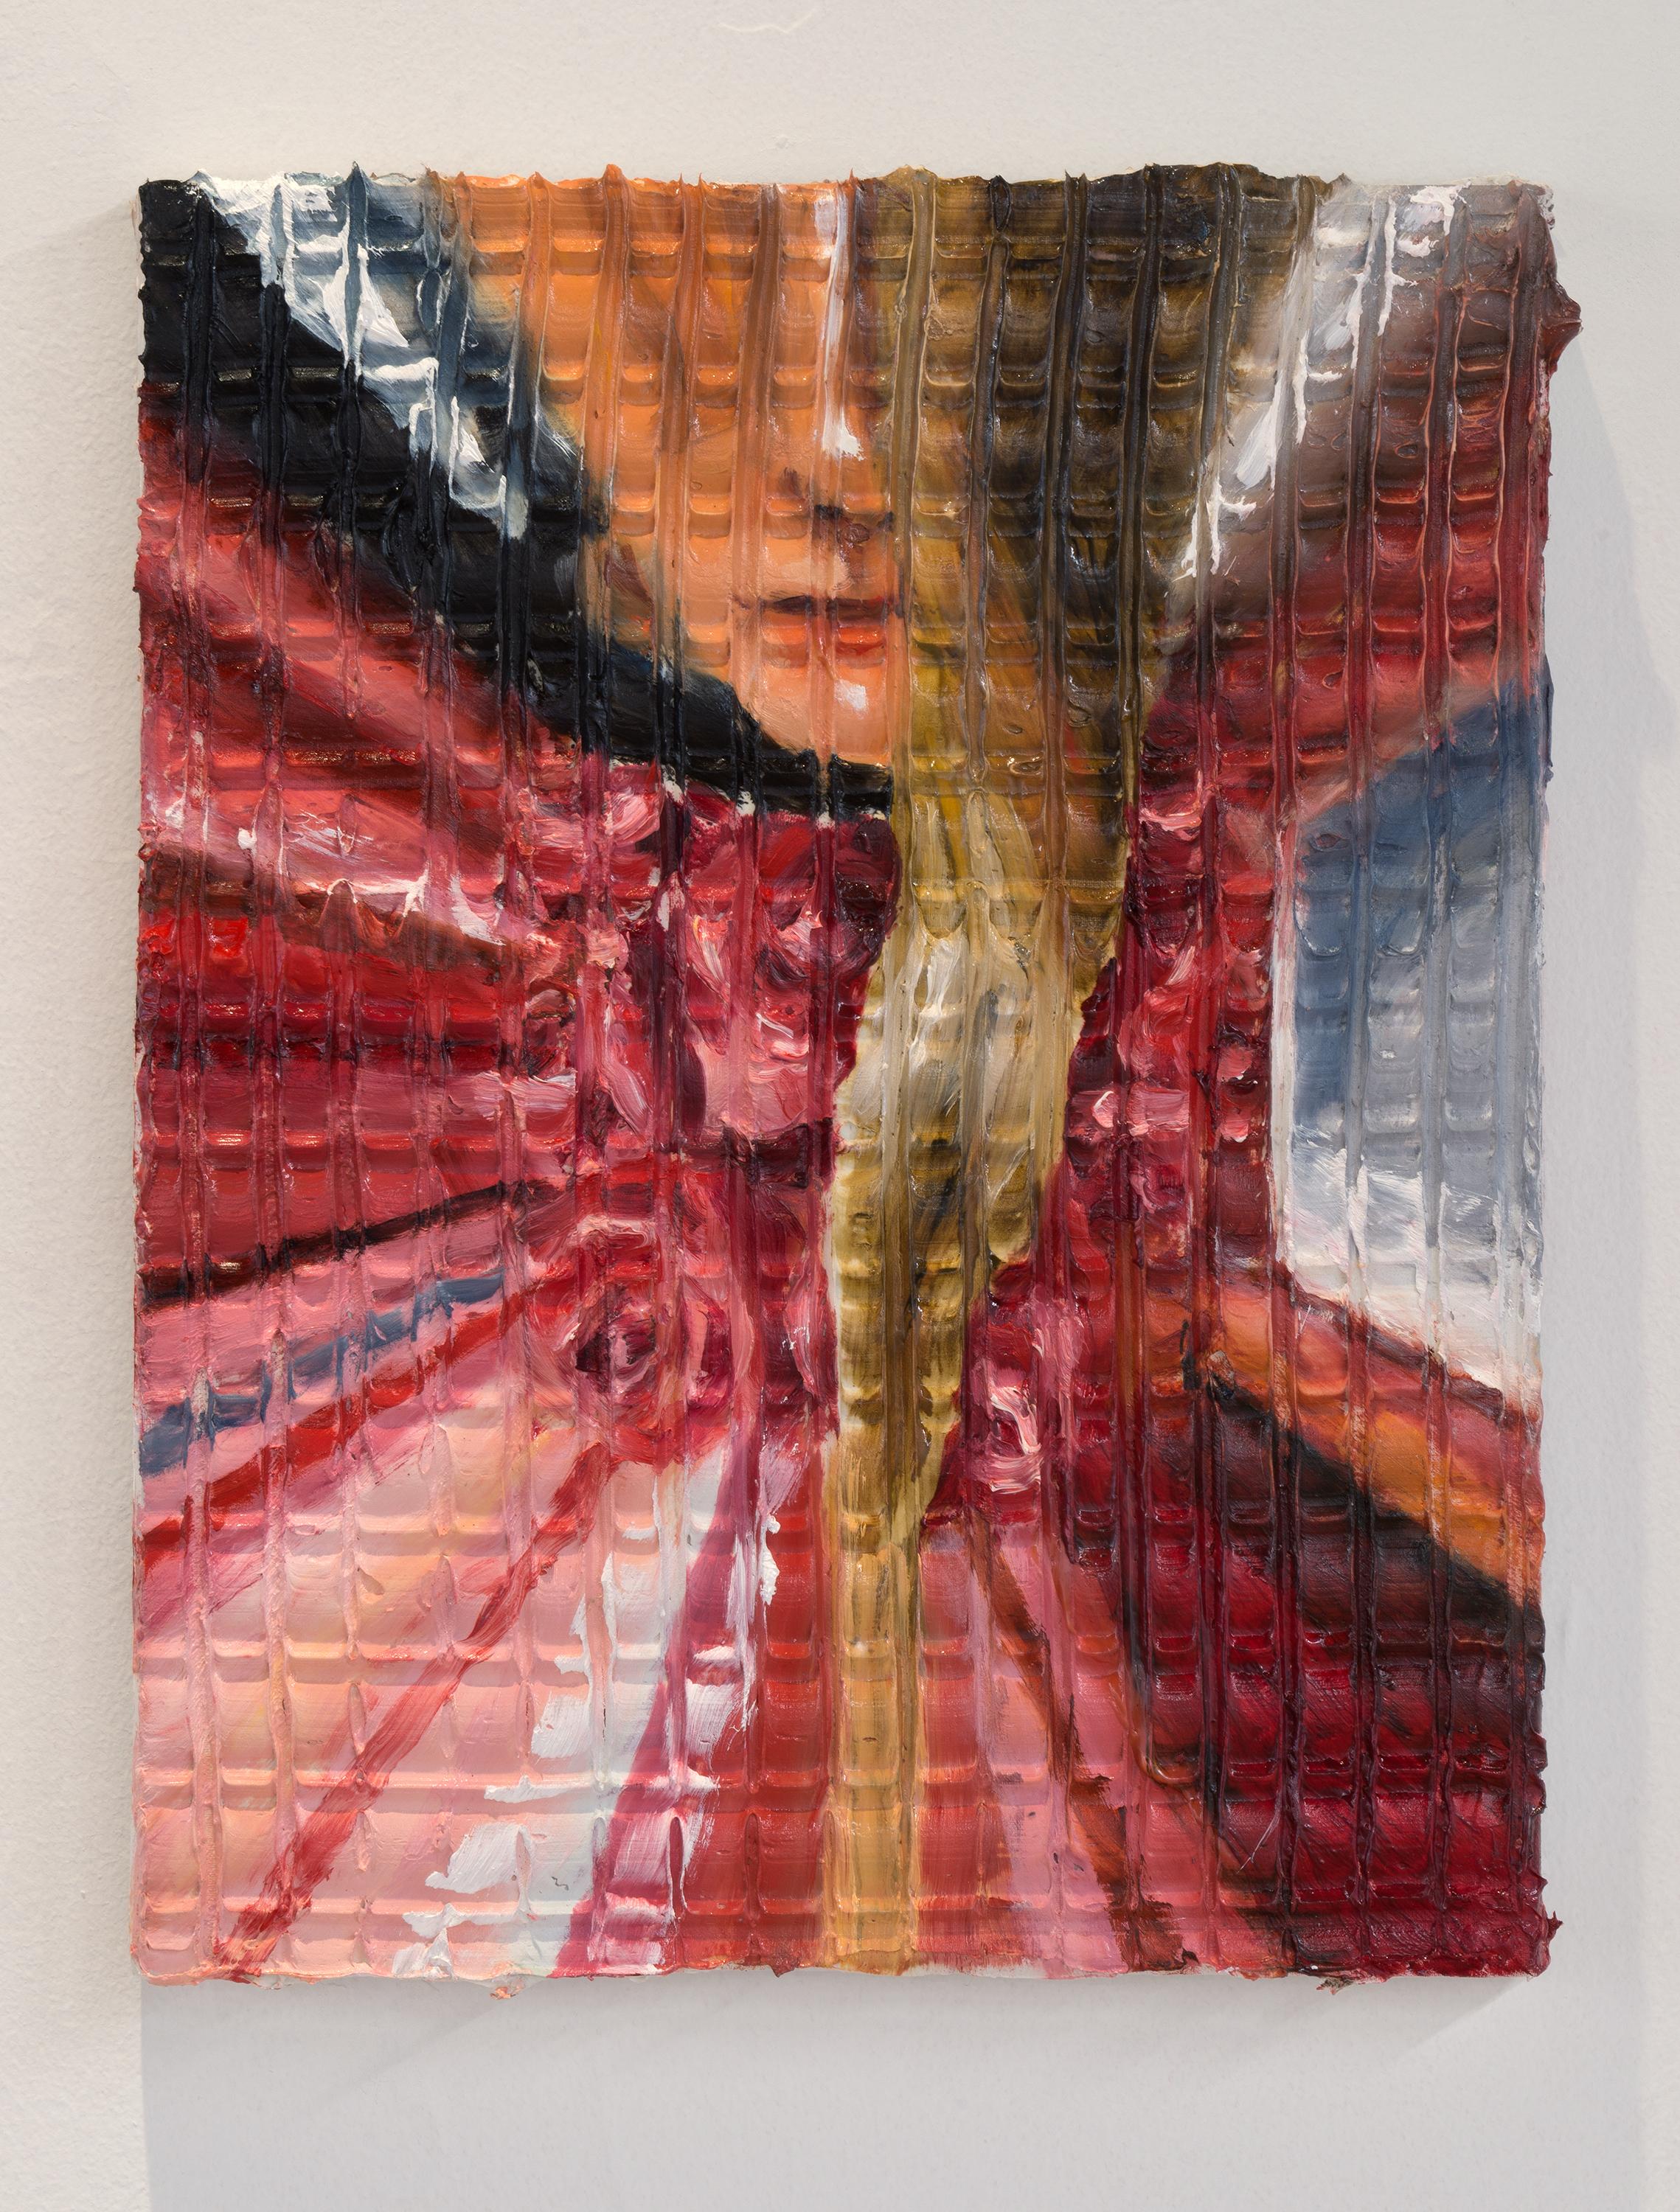 THE ROSE DRAPE is an oil on canvas painting by Eleanor Aldrich created in 2022. This piece utilizes a thick caulk on top of the canvas as an underlayment, creating a grid texture. The main focus of the piece is an image of a woman, with long blond